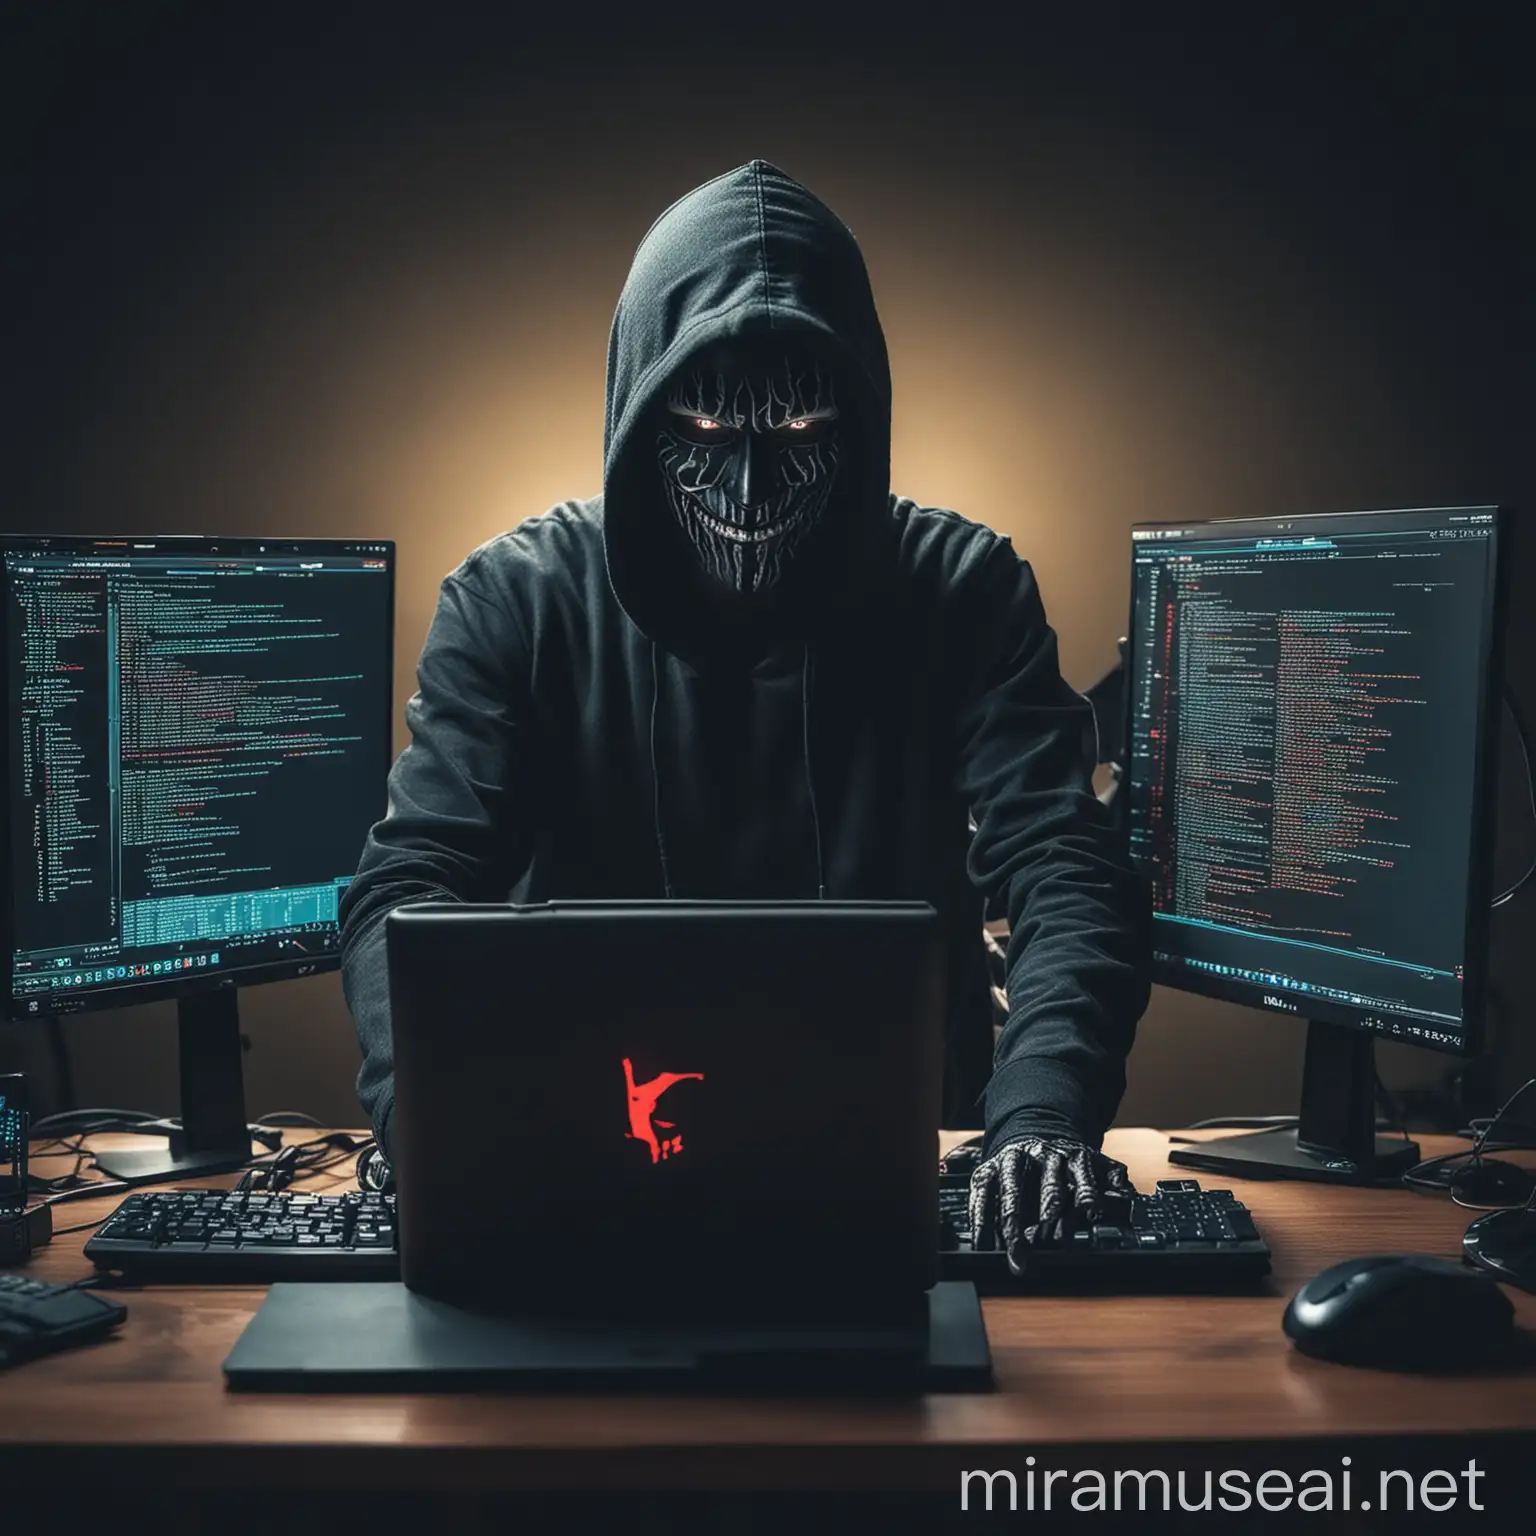 A person using Kali Linux for hacking